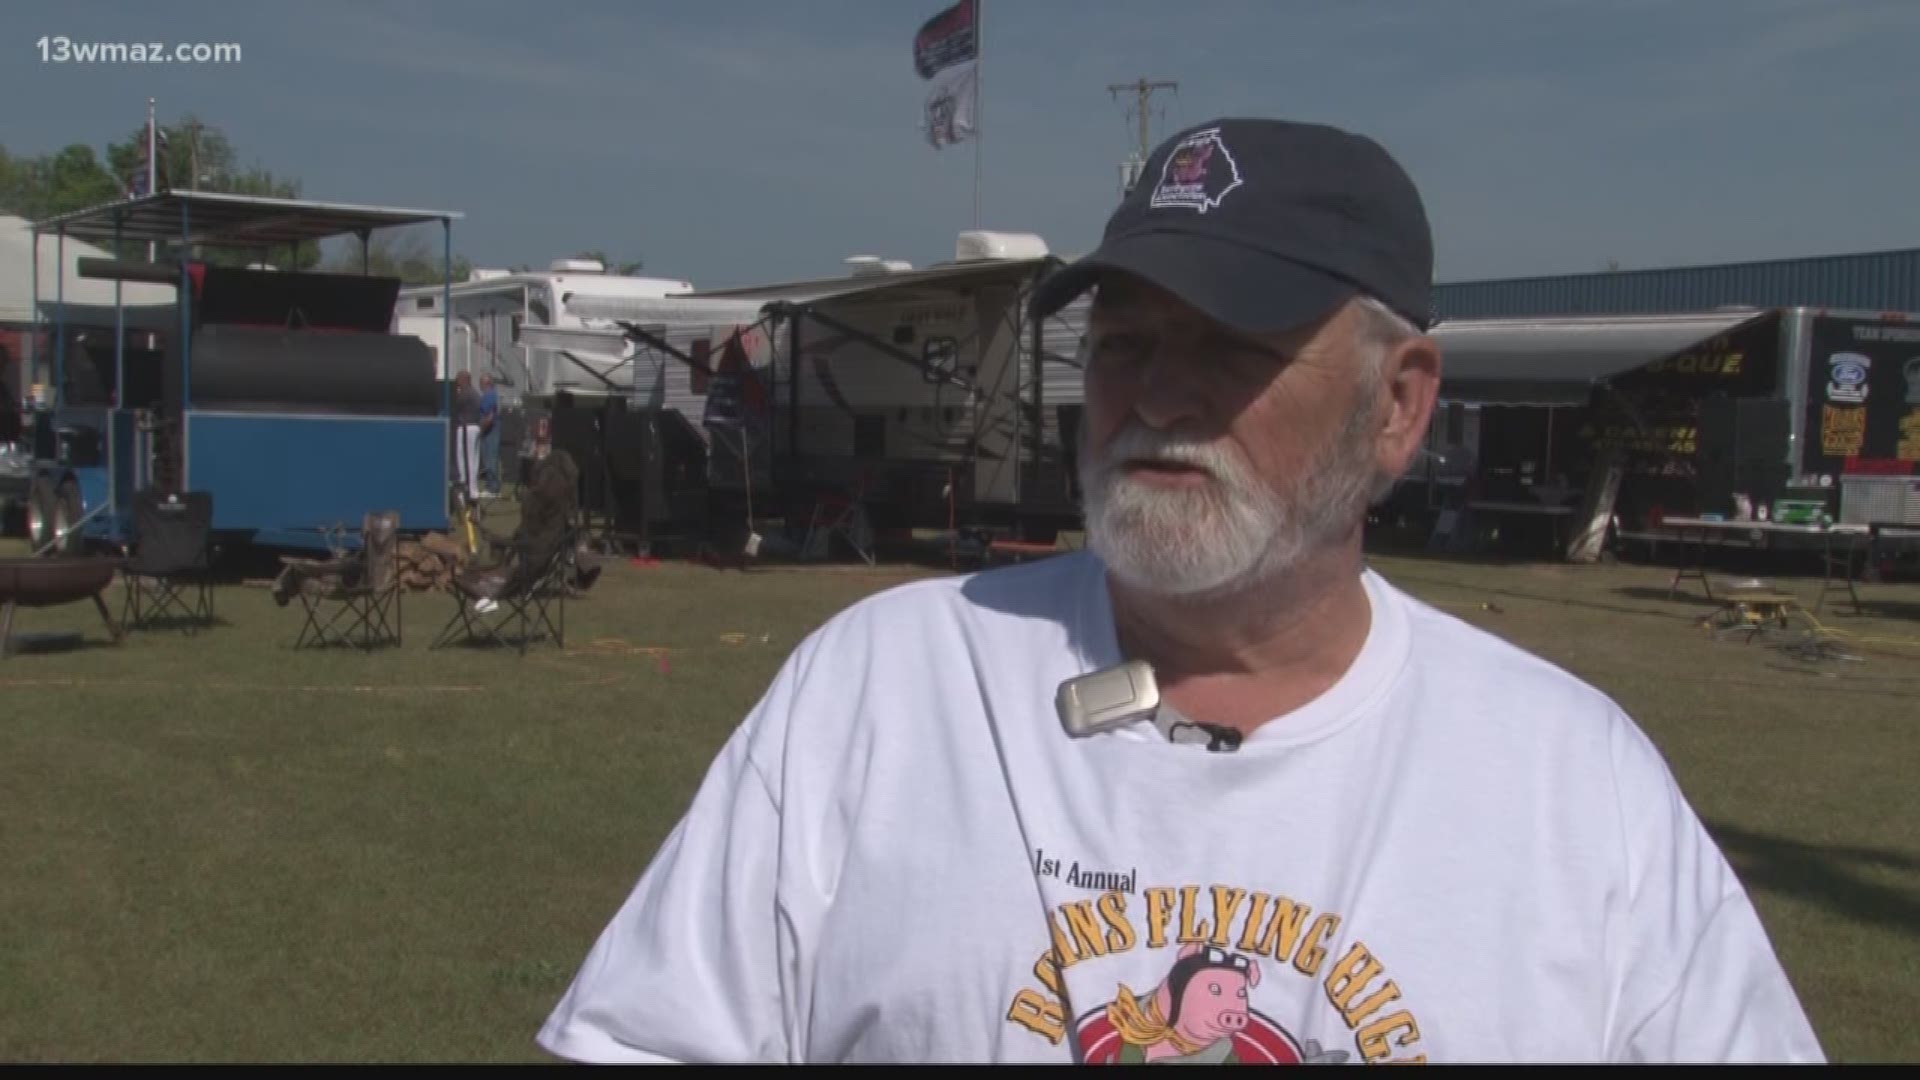 Robins Flying High Barbecue Festival held to benefit veterans 